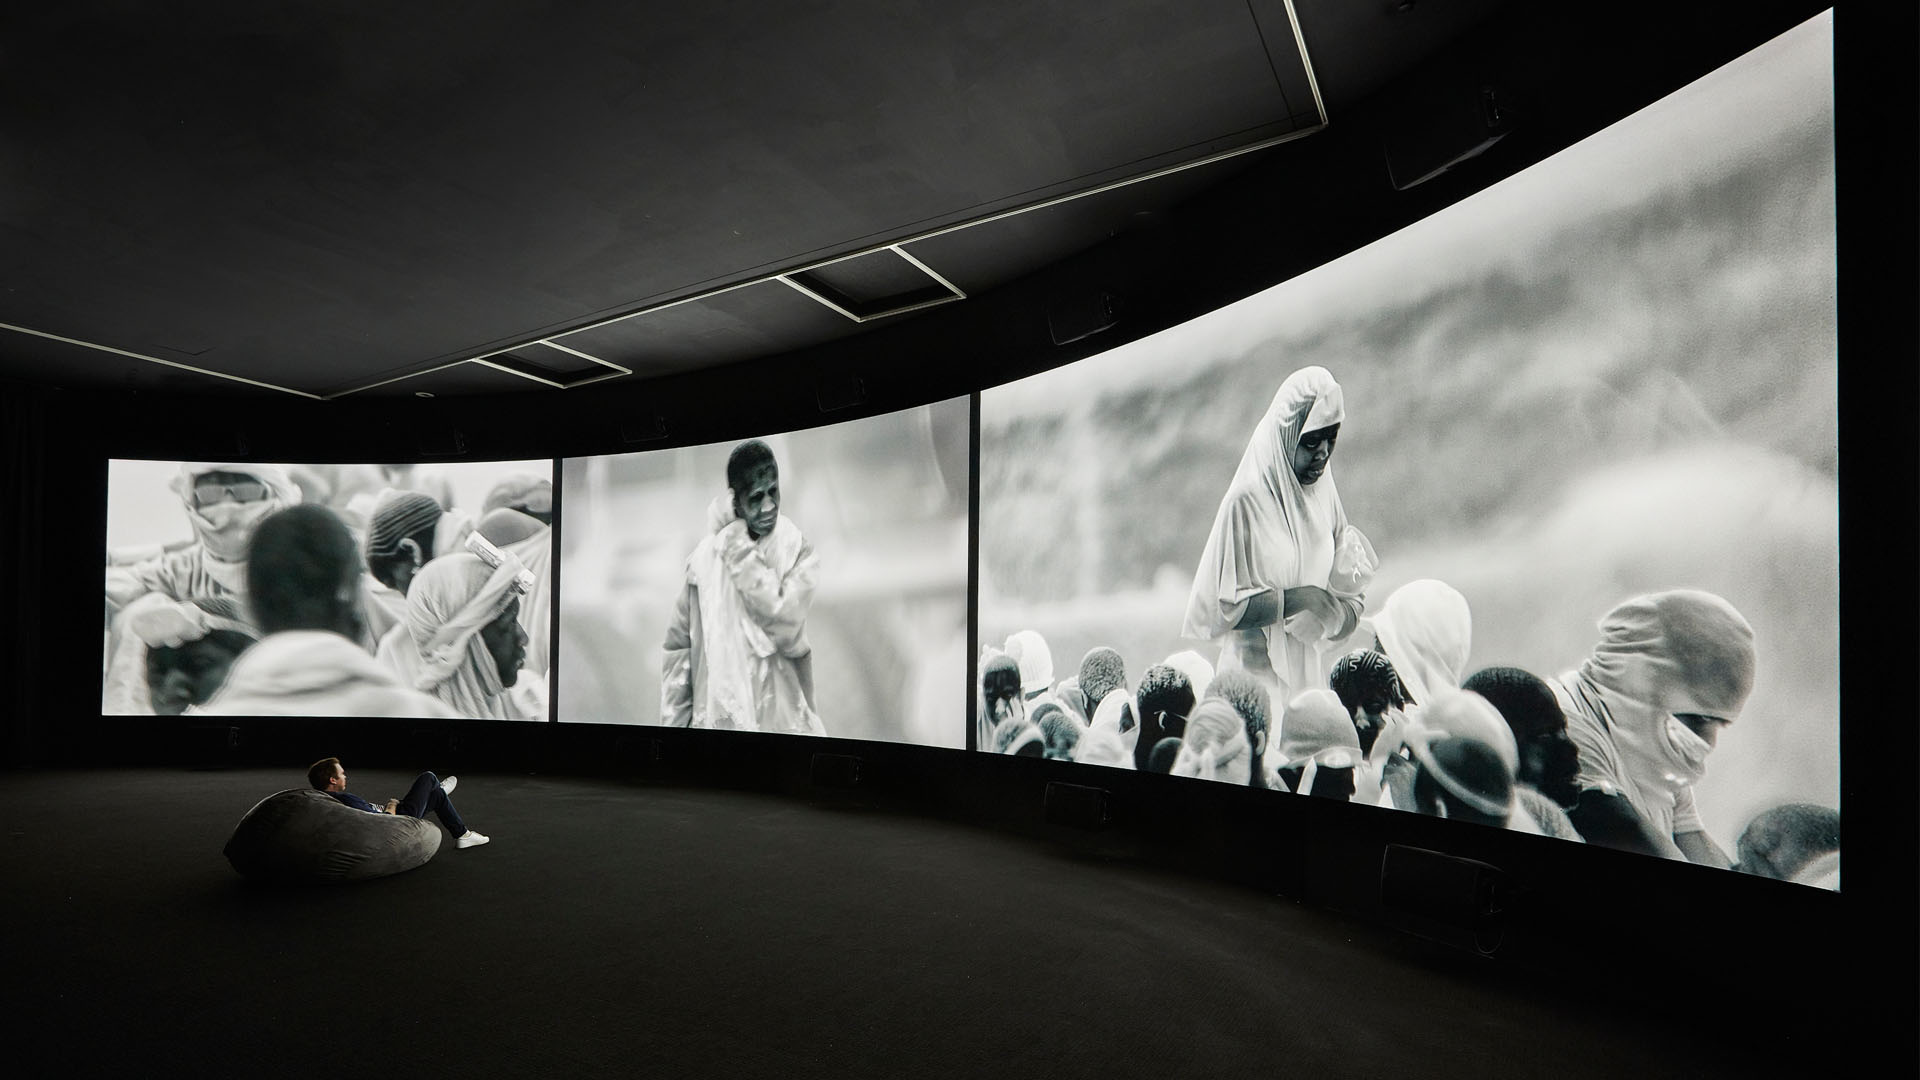 Richard Mosse <br /> <em>Incoming</em> 2015–16 <br /> Cinematographer / Editor: Trevor Tweeten<br /> Composer / Sound Designer: Ben Frost <br /> Installation view NGV Triennial 2017<br /> Co-commissioned by the National Gallery of Victoria, Melbourne and the Barbican Art Gallery, London<br /> National Gallery of Victoria, Melbourne <br /> Purchased with funds donated by Christopher Thomas AM and Cheryl Thomas, Jane and Stephen Hains, Vivien and Graham Knowles, Michael and Emily Tong and 2016 NGV Curatorial Tour donors, 2017<br /> © Richard Mosse<br /> Photo: Sean Fennessy